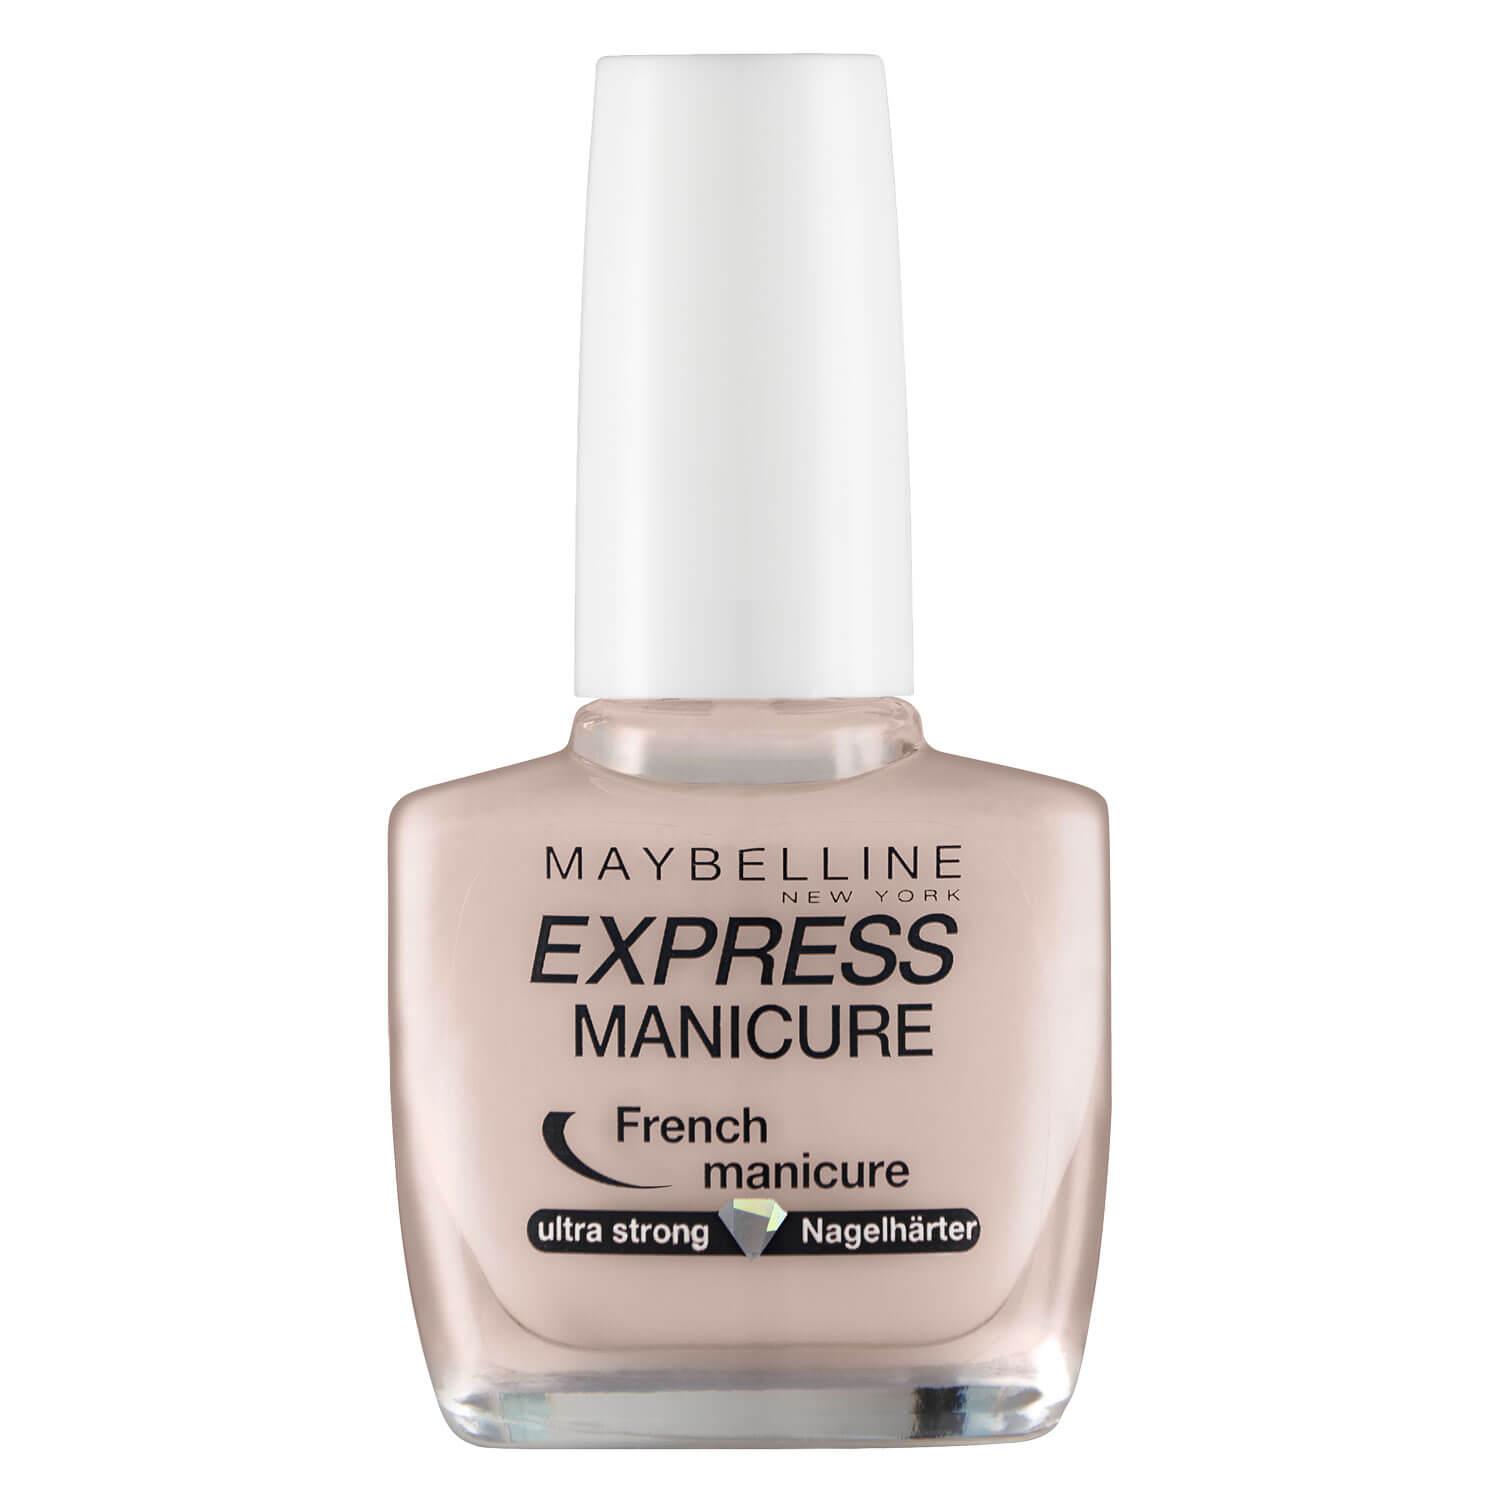 Maybelline NY Nails - Vernis a Ongles Durcisseur Long Pastel 07 Pastel